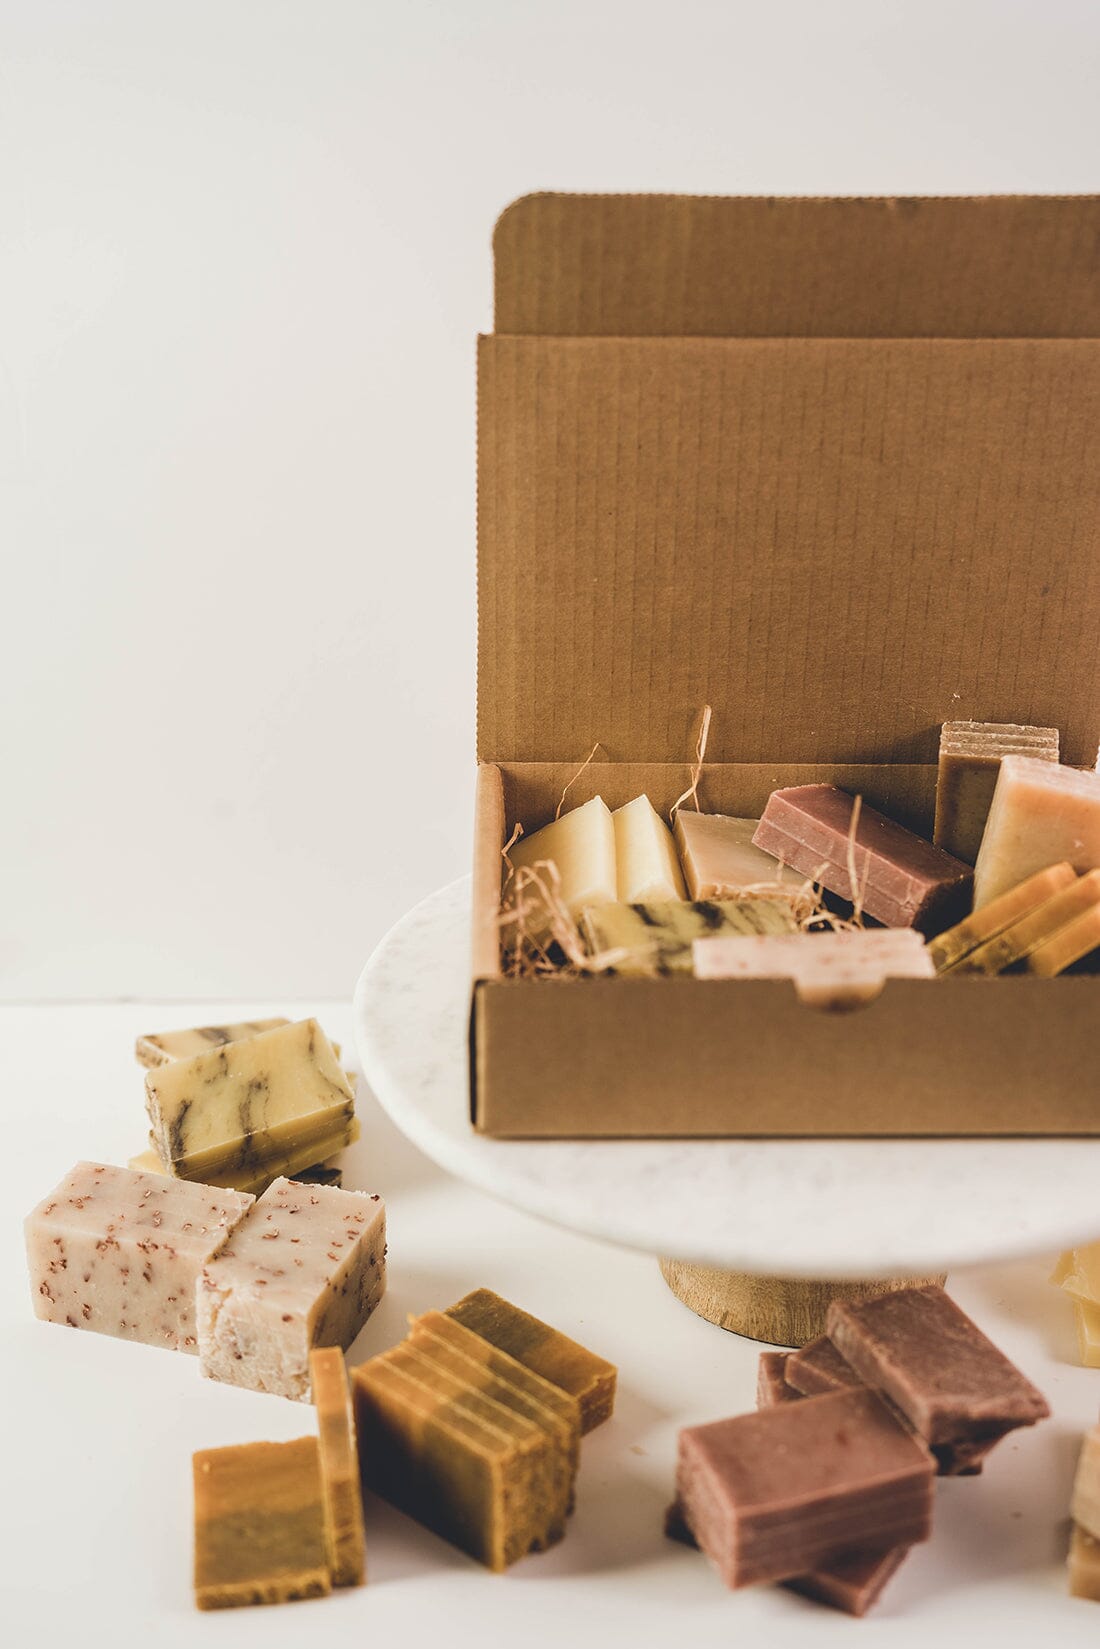  A cardboard box resting on a table that is packed with various samples of all natural bars of soap set on a white background.